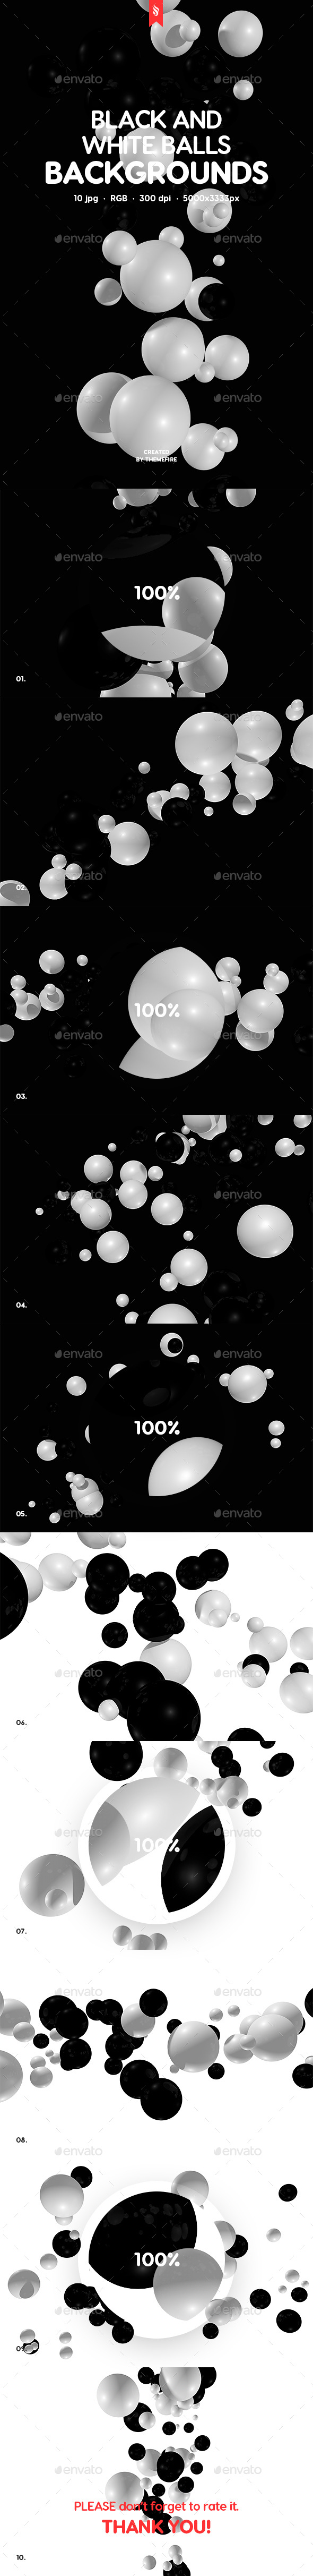 GraphicRiver Black and White Balls Backgrounds 21083639